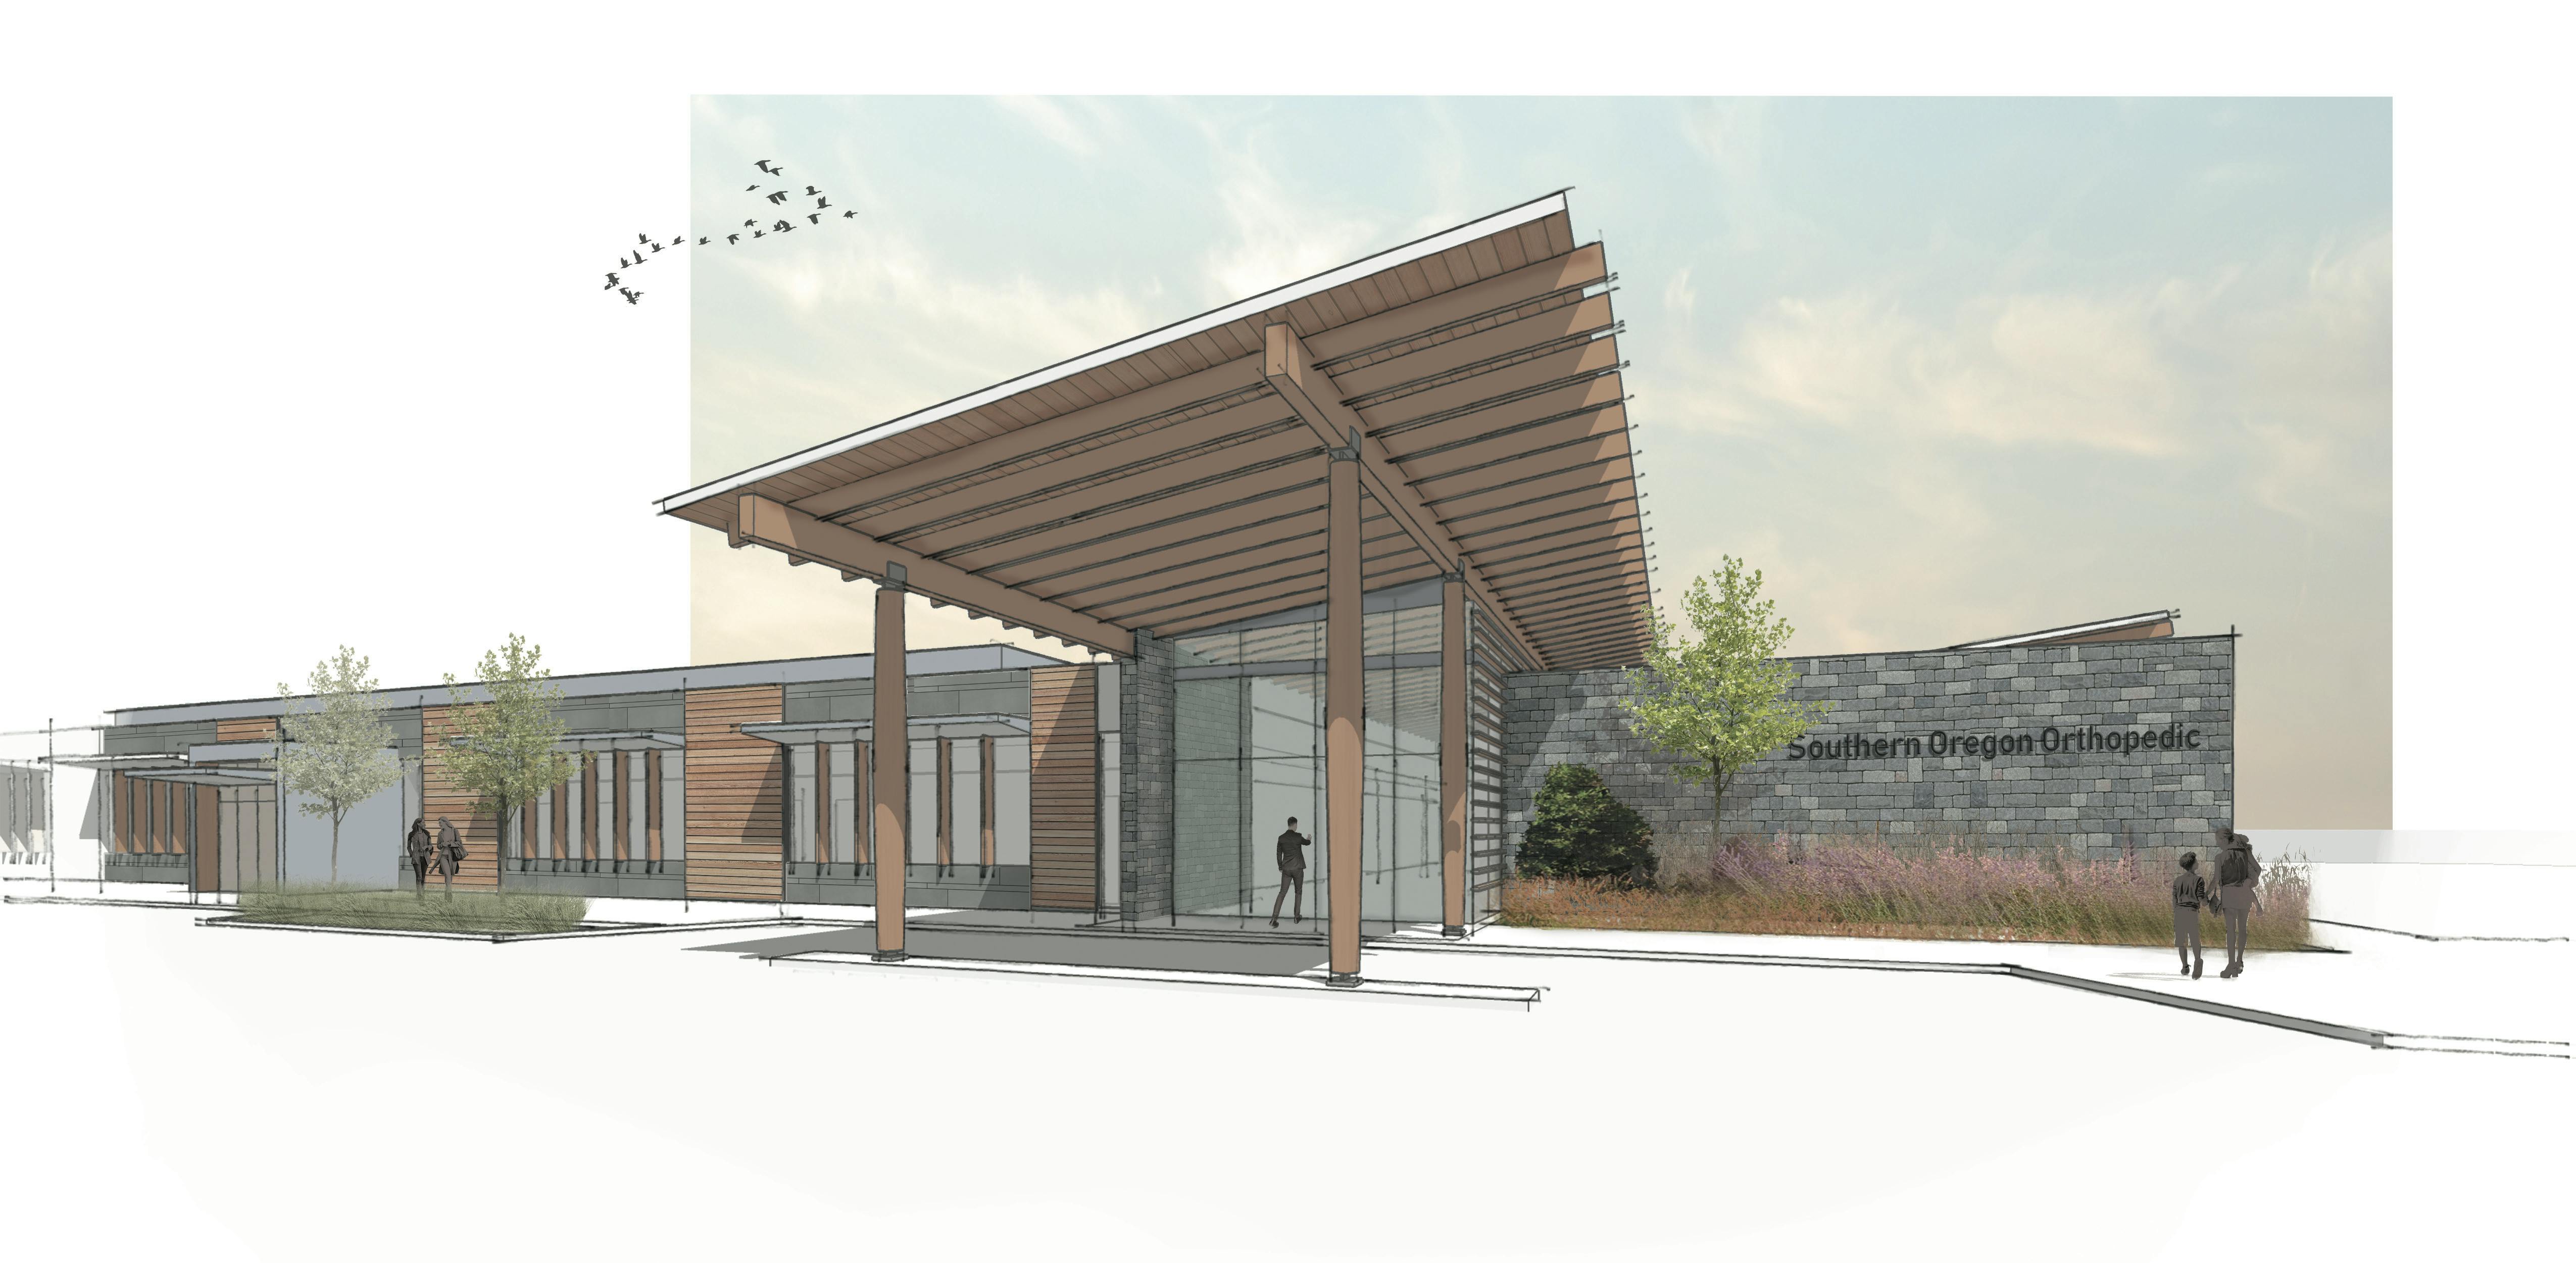 Sketch rendering of the entryway of the OOC ambulatory surgery center from the outside of the building showing a large canopy covering for patient drop offs. 